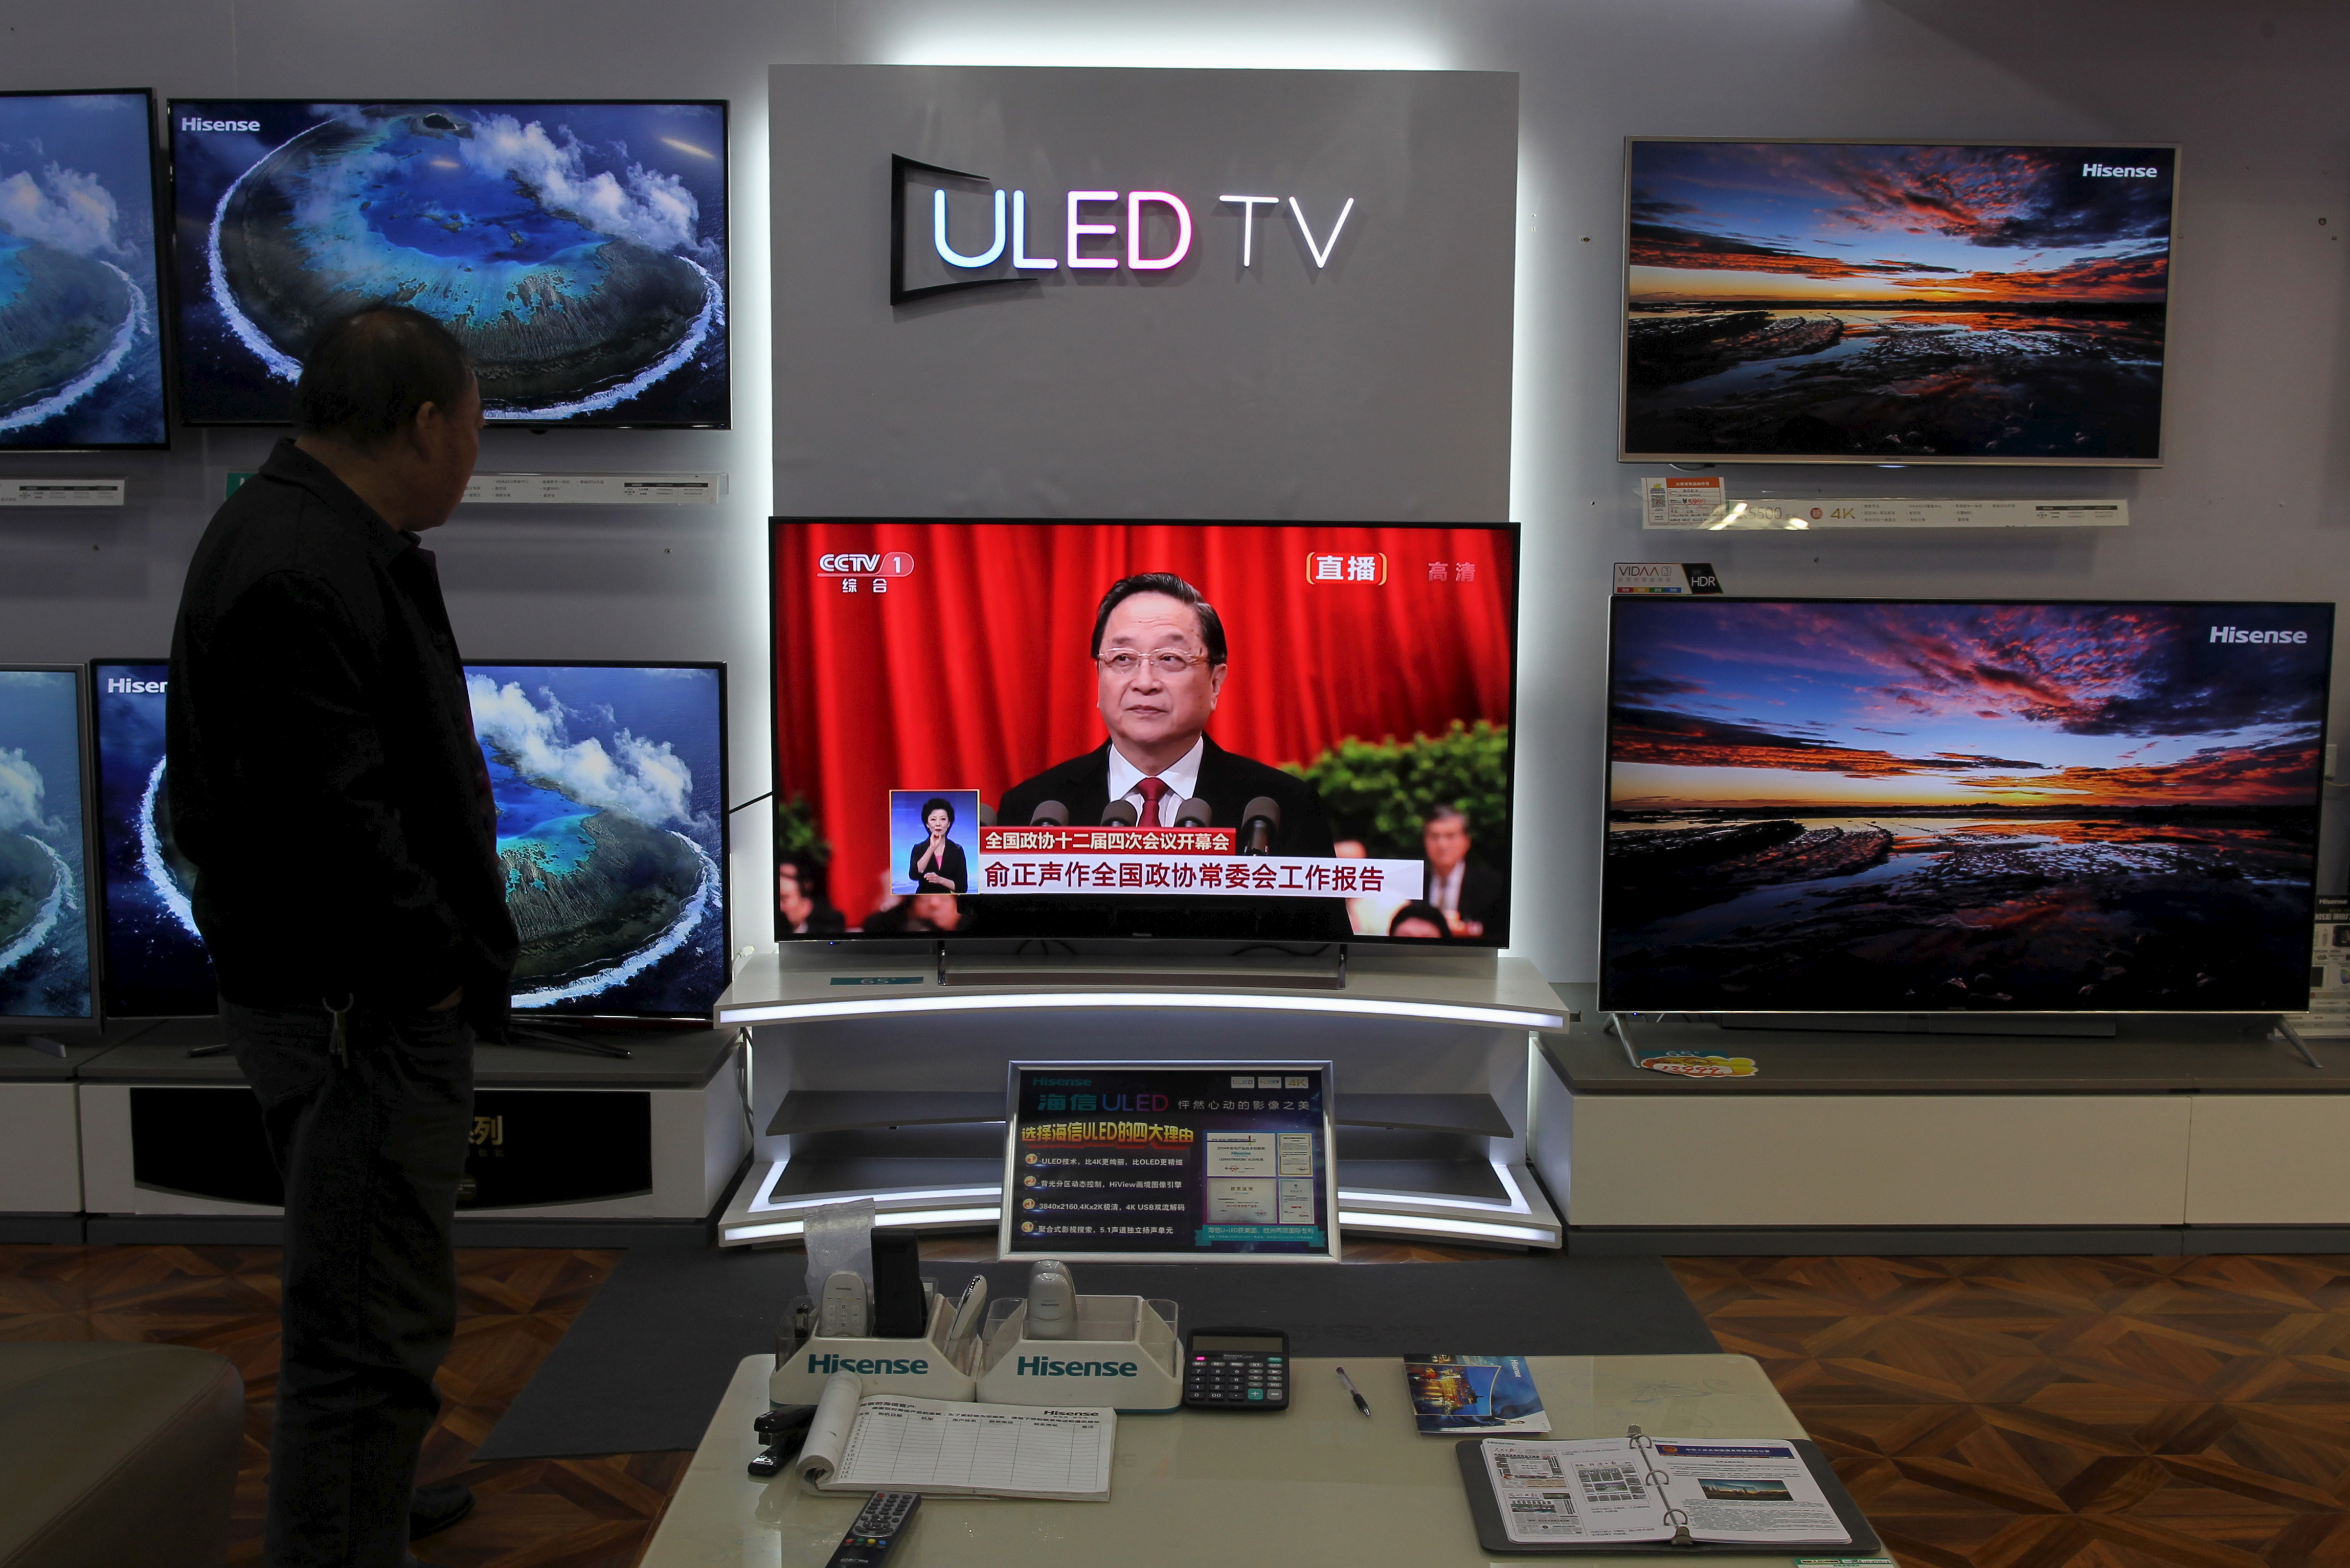 A man watches a TV screen showing live broadcast of Yu giving a speech during the opening session of the CPPCC, at a shopping mall in Kunming